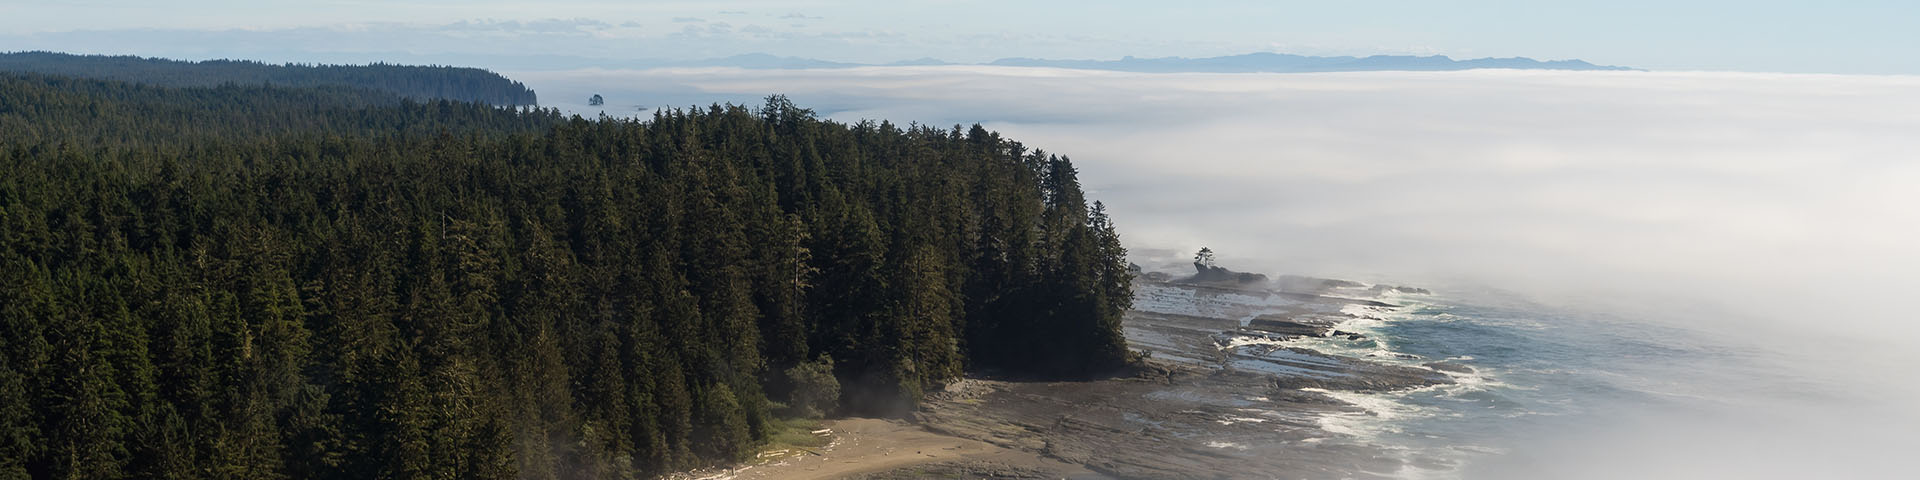 arieal view of coast line with fog moving in over the beach and forested land.